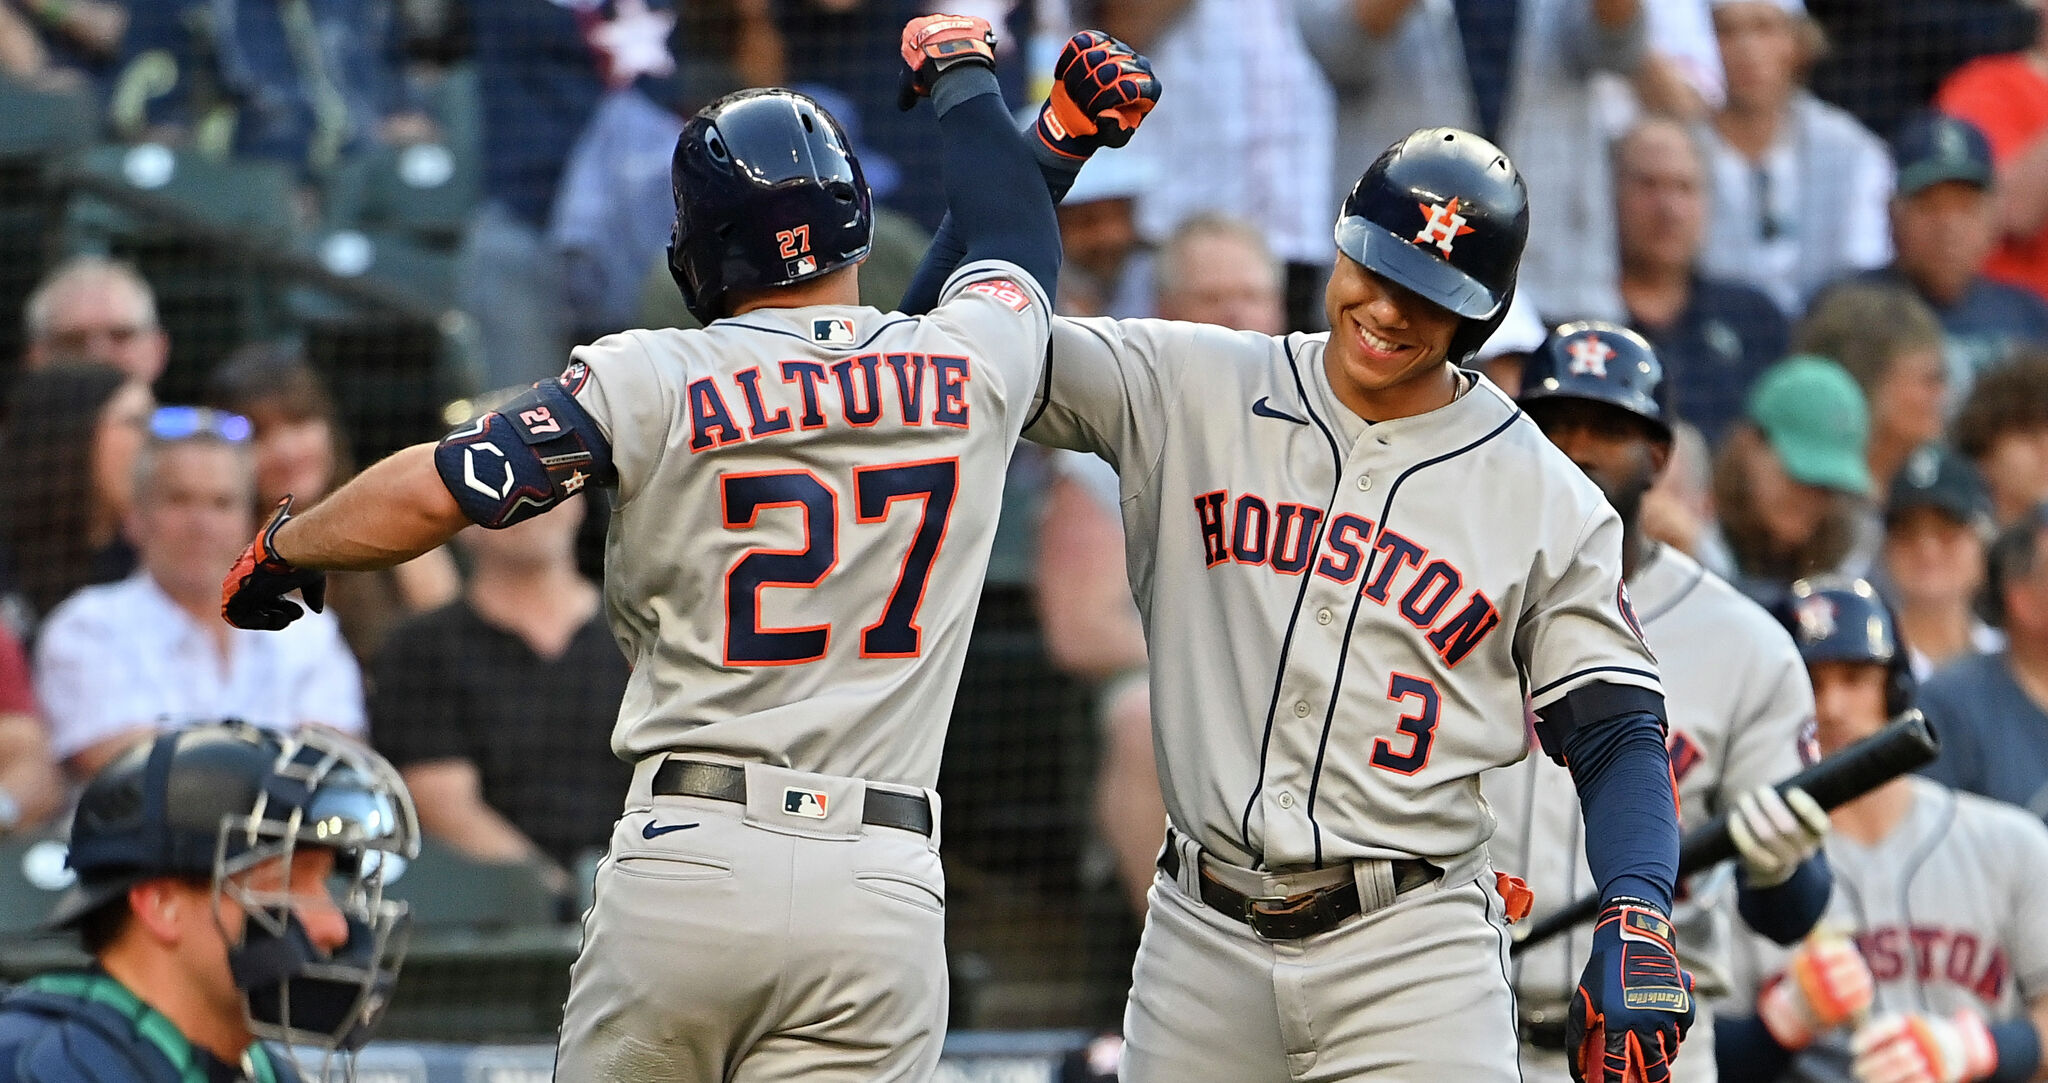 Big jump for Jeremy Peña, big win for Houston Astros